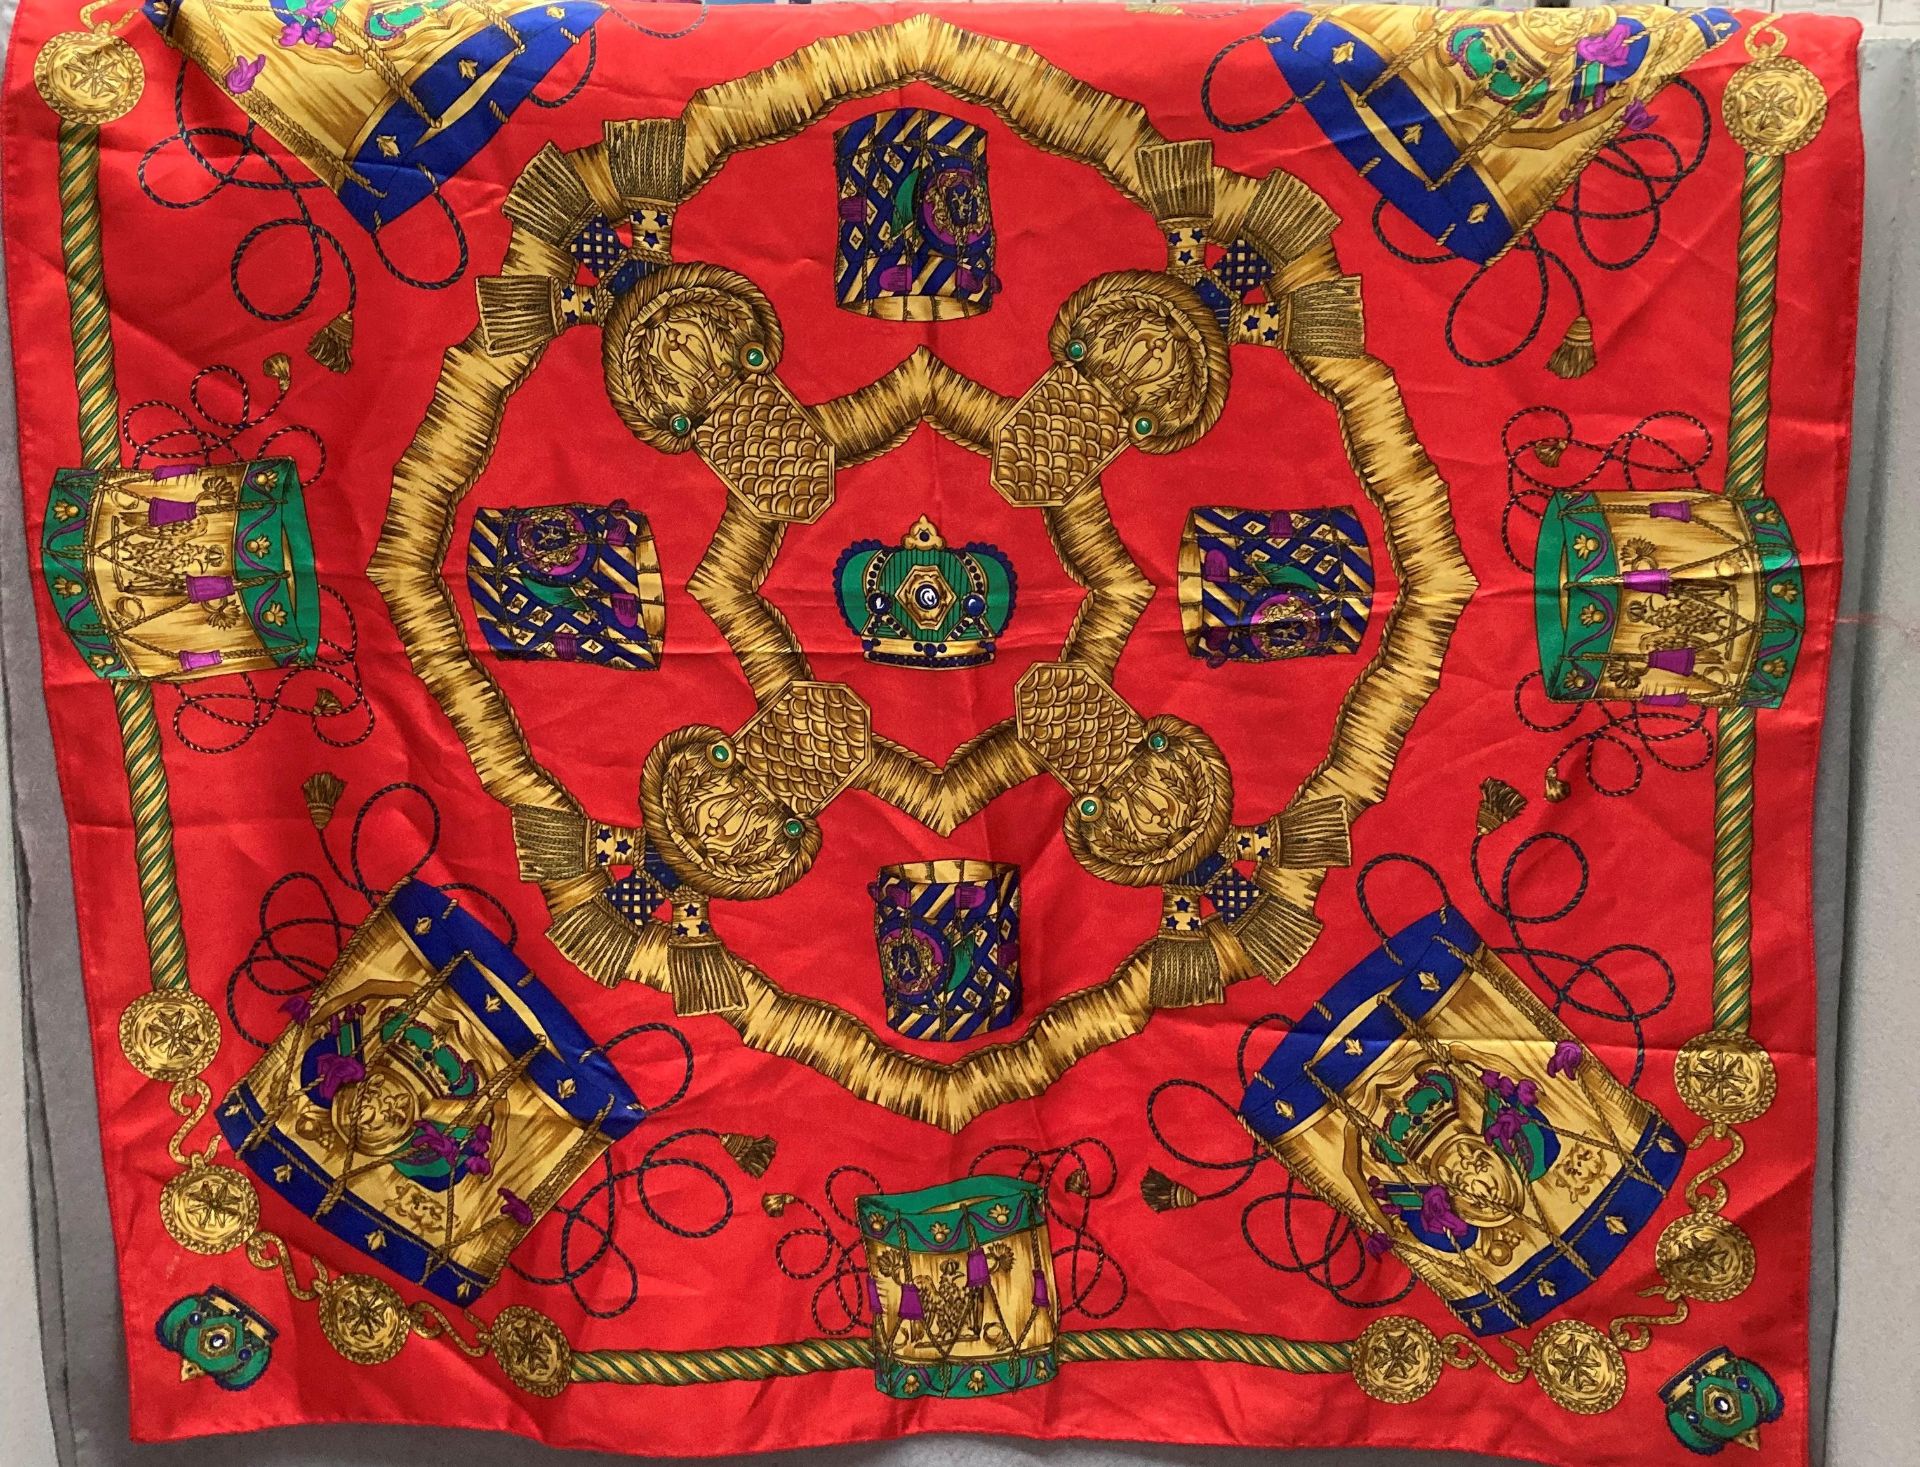 Five heraldic design etc. silk scarves by Matinto, etc. - Image 5 of 7